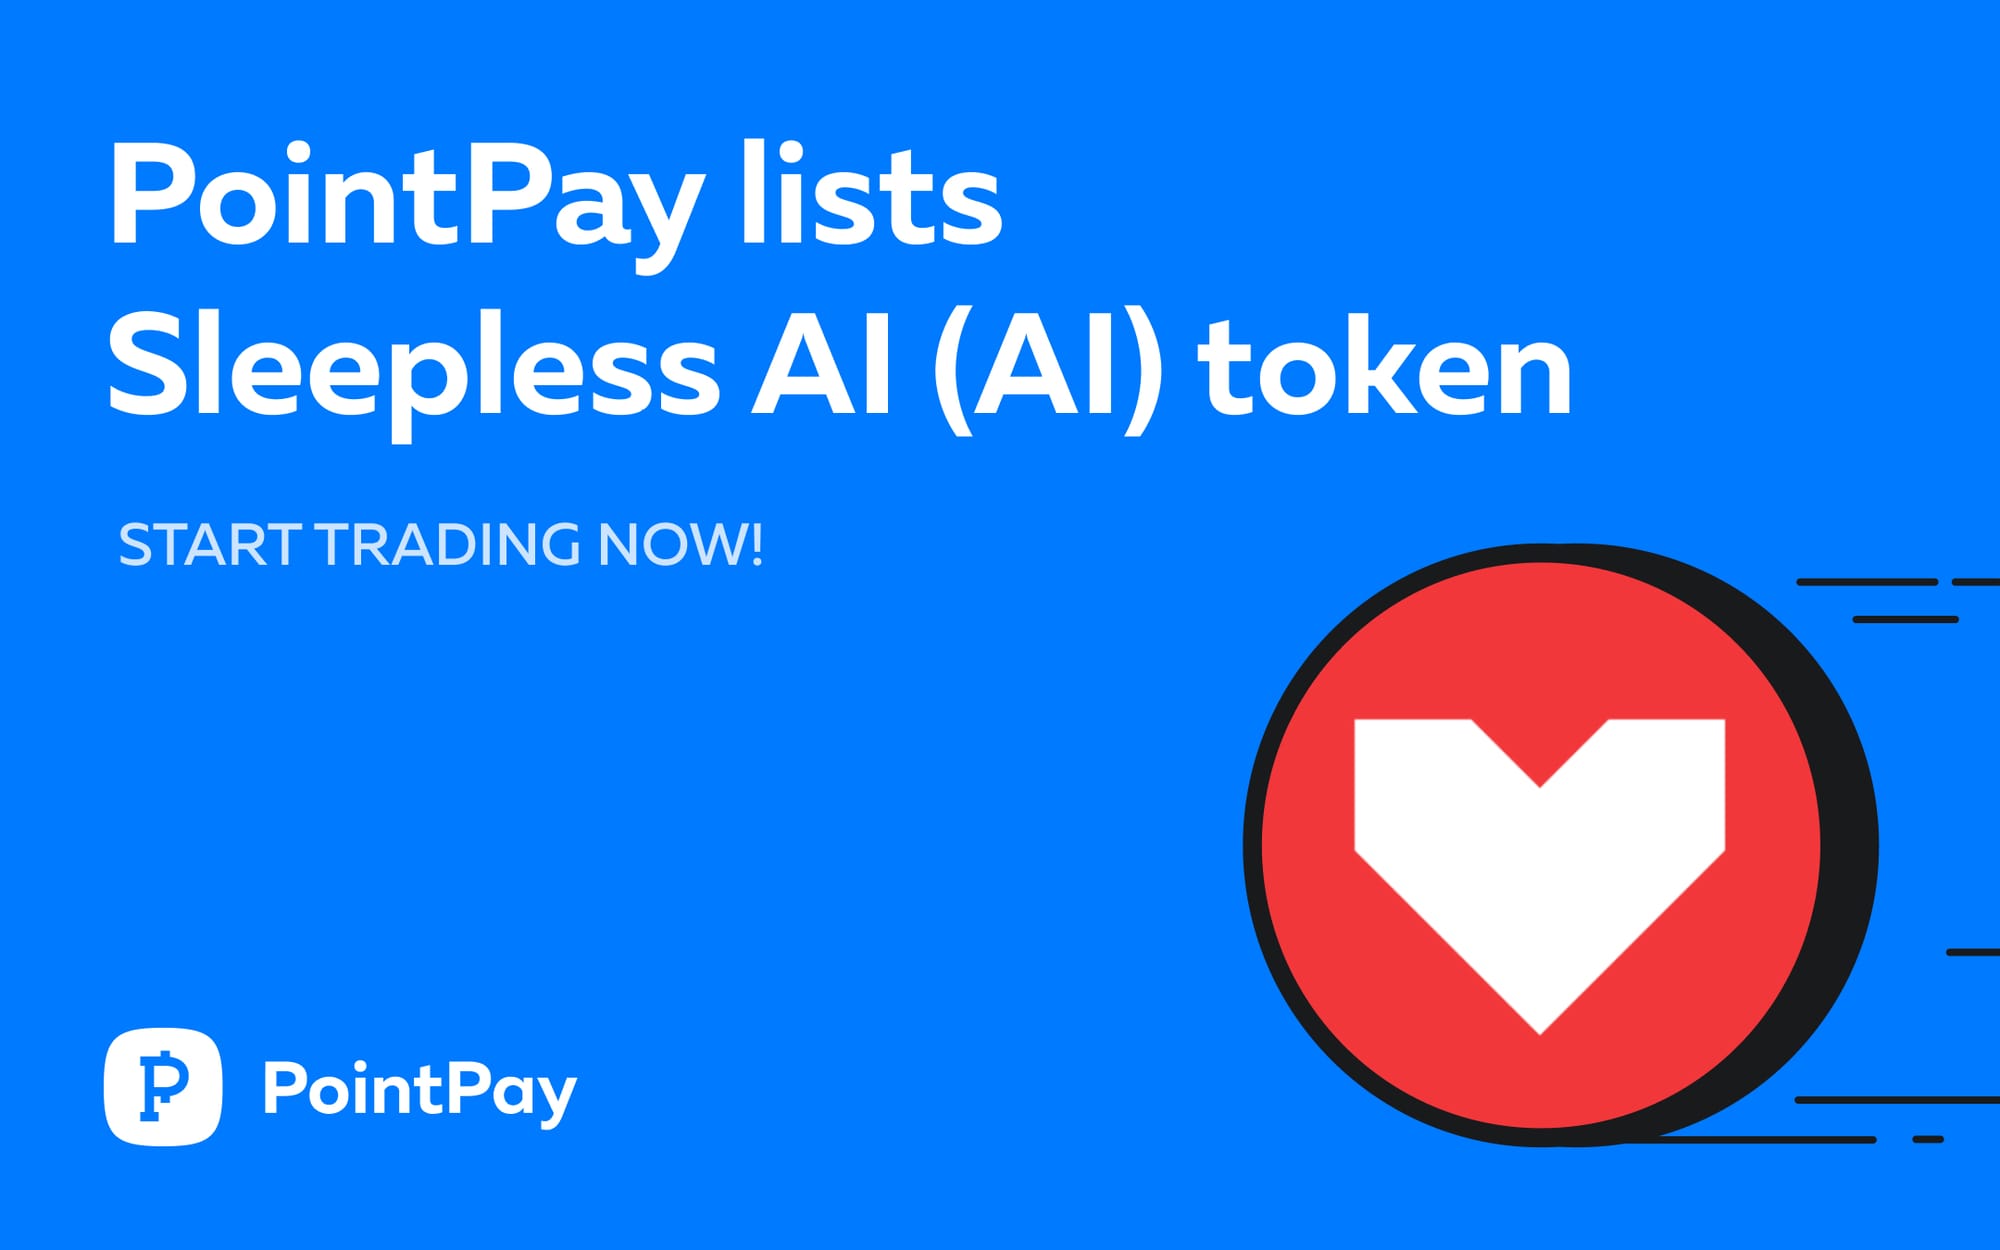 Introducing the AI Token to the PointPay Platform!